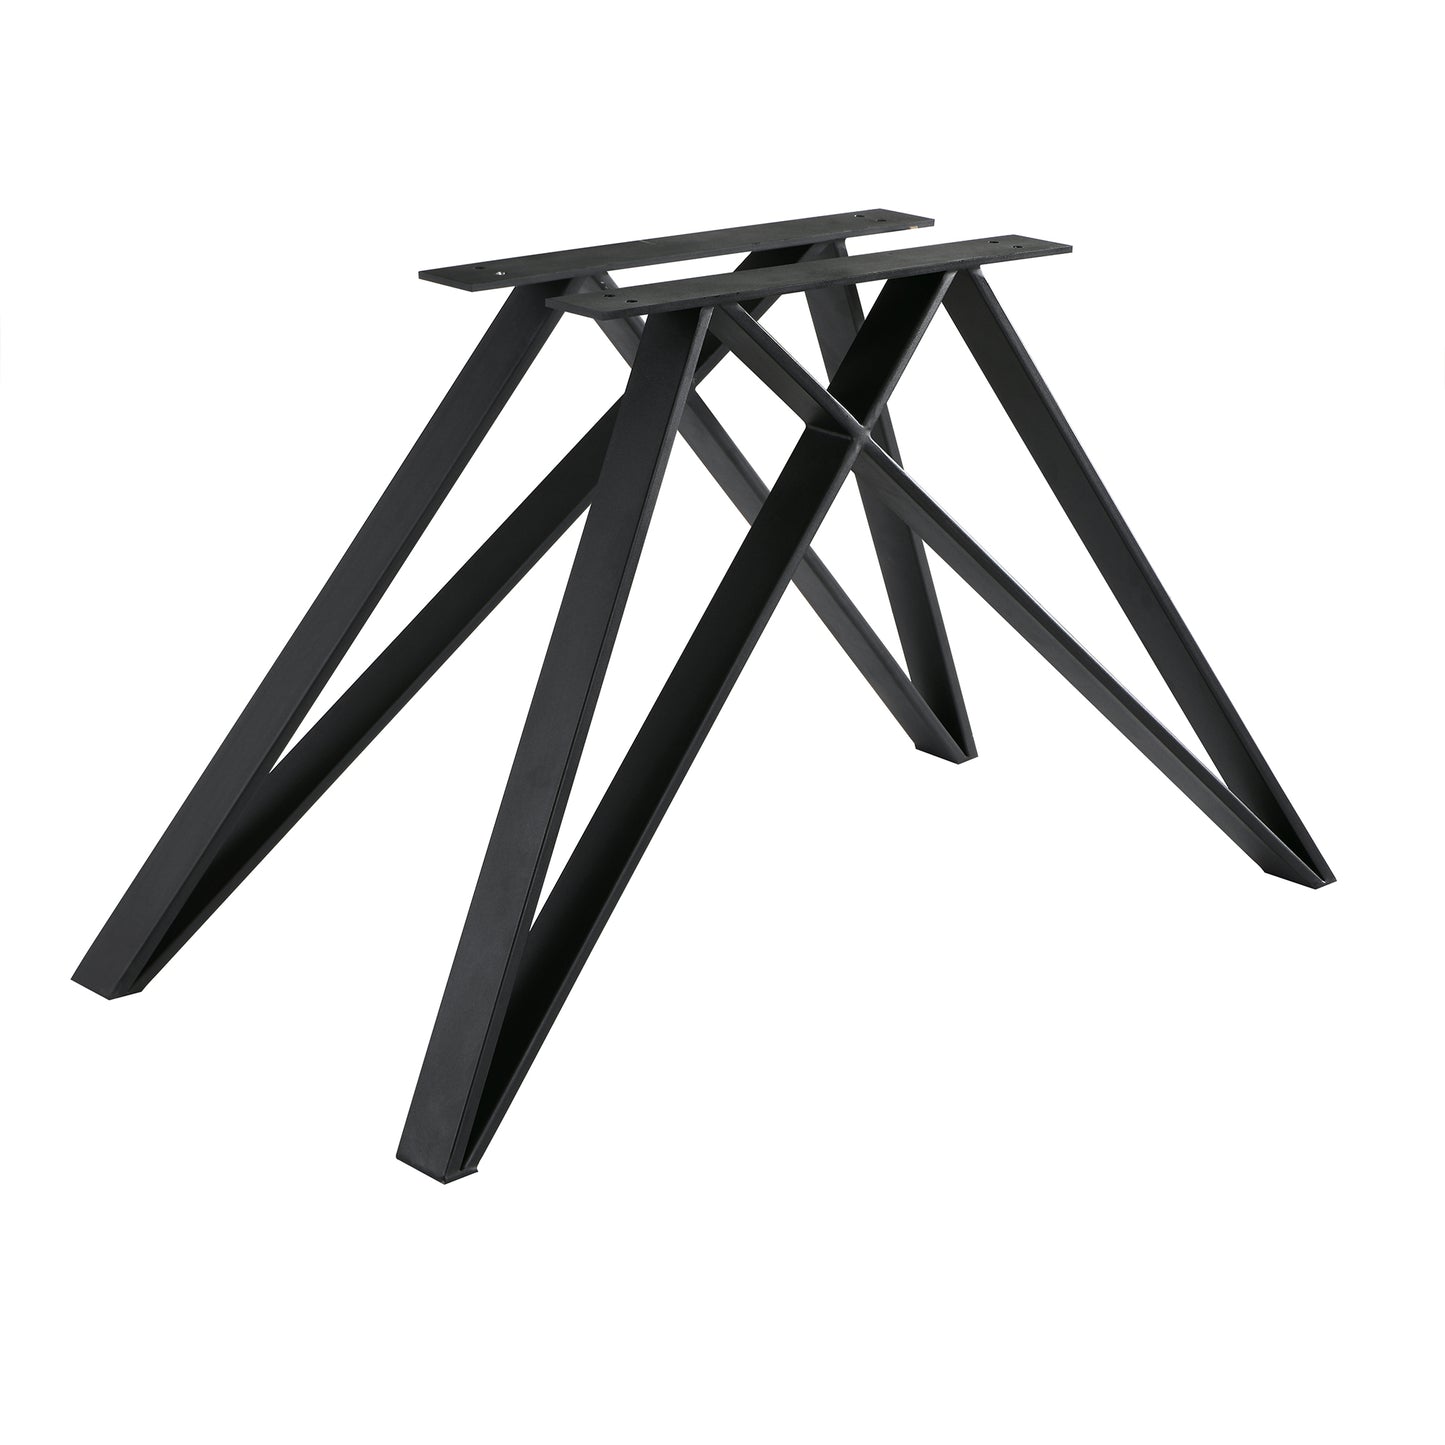 Modena Contemporary Dining Table in Matte Black Finish and Walnut Wood Top